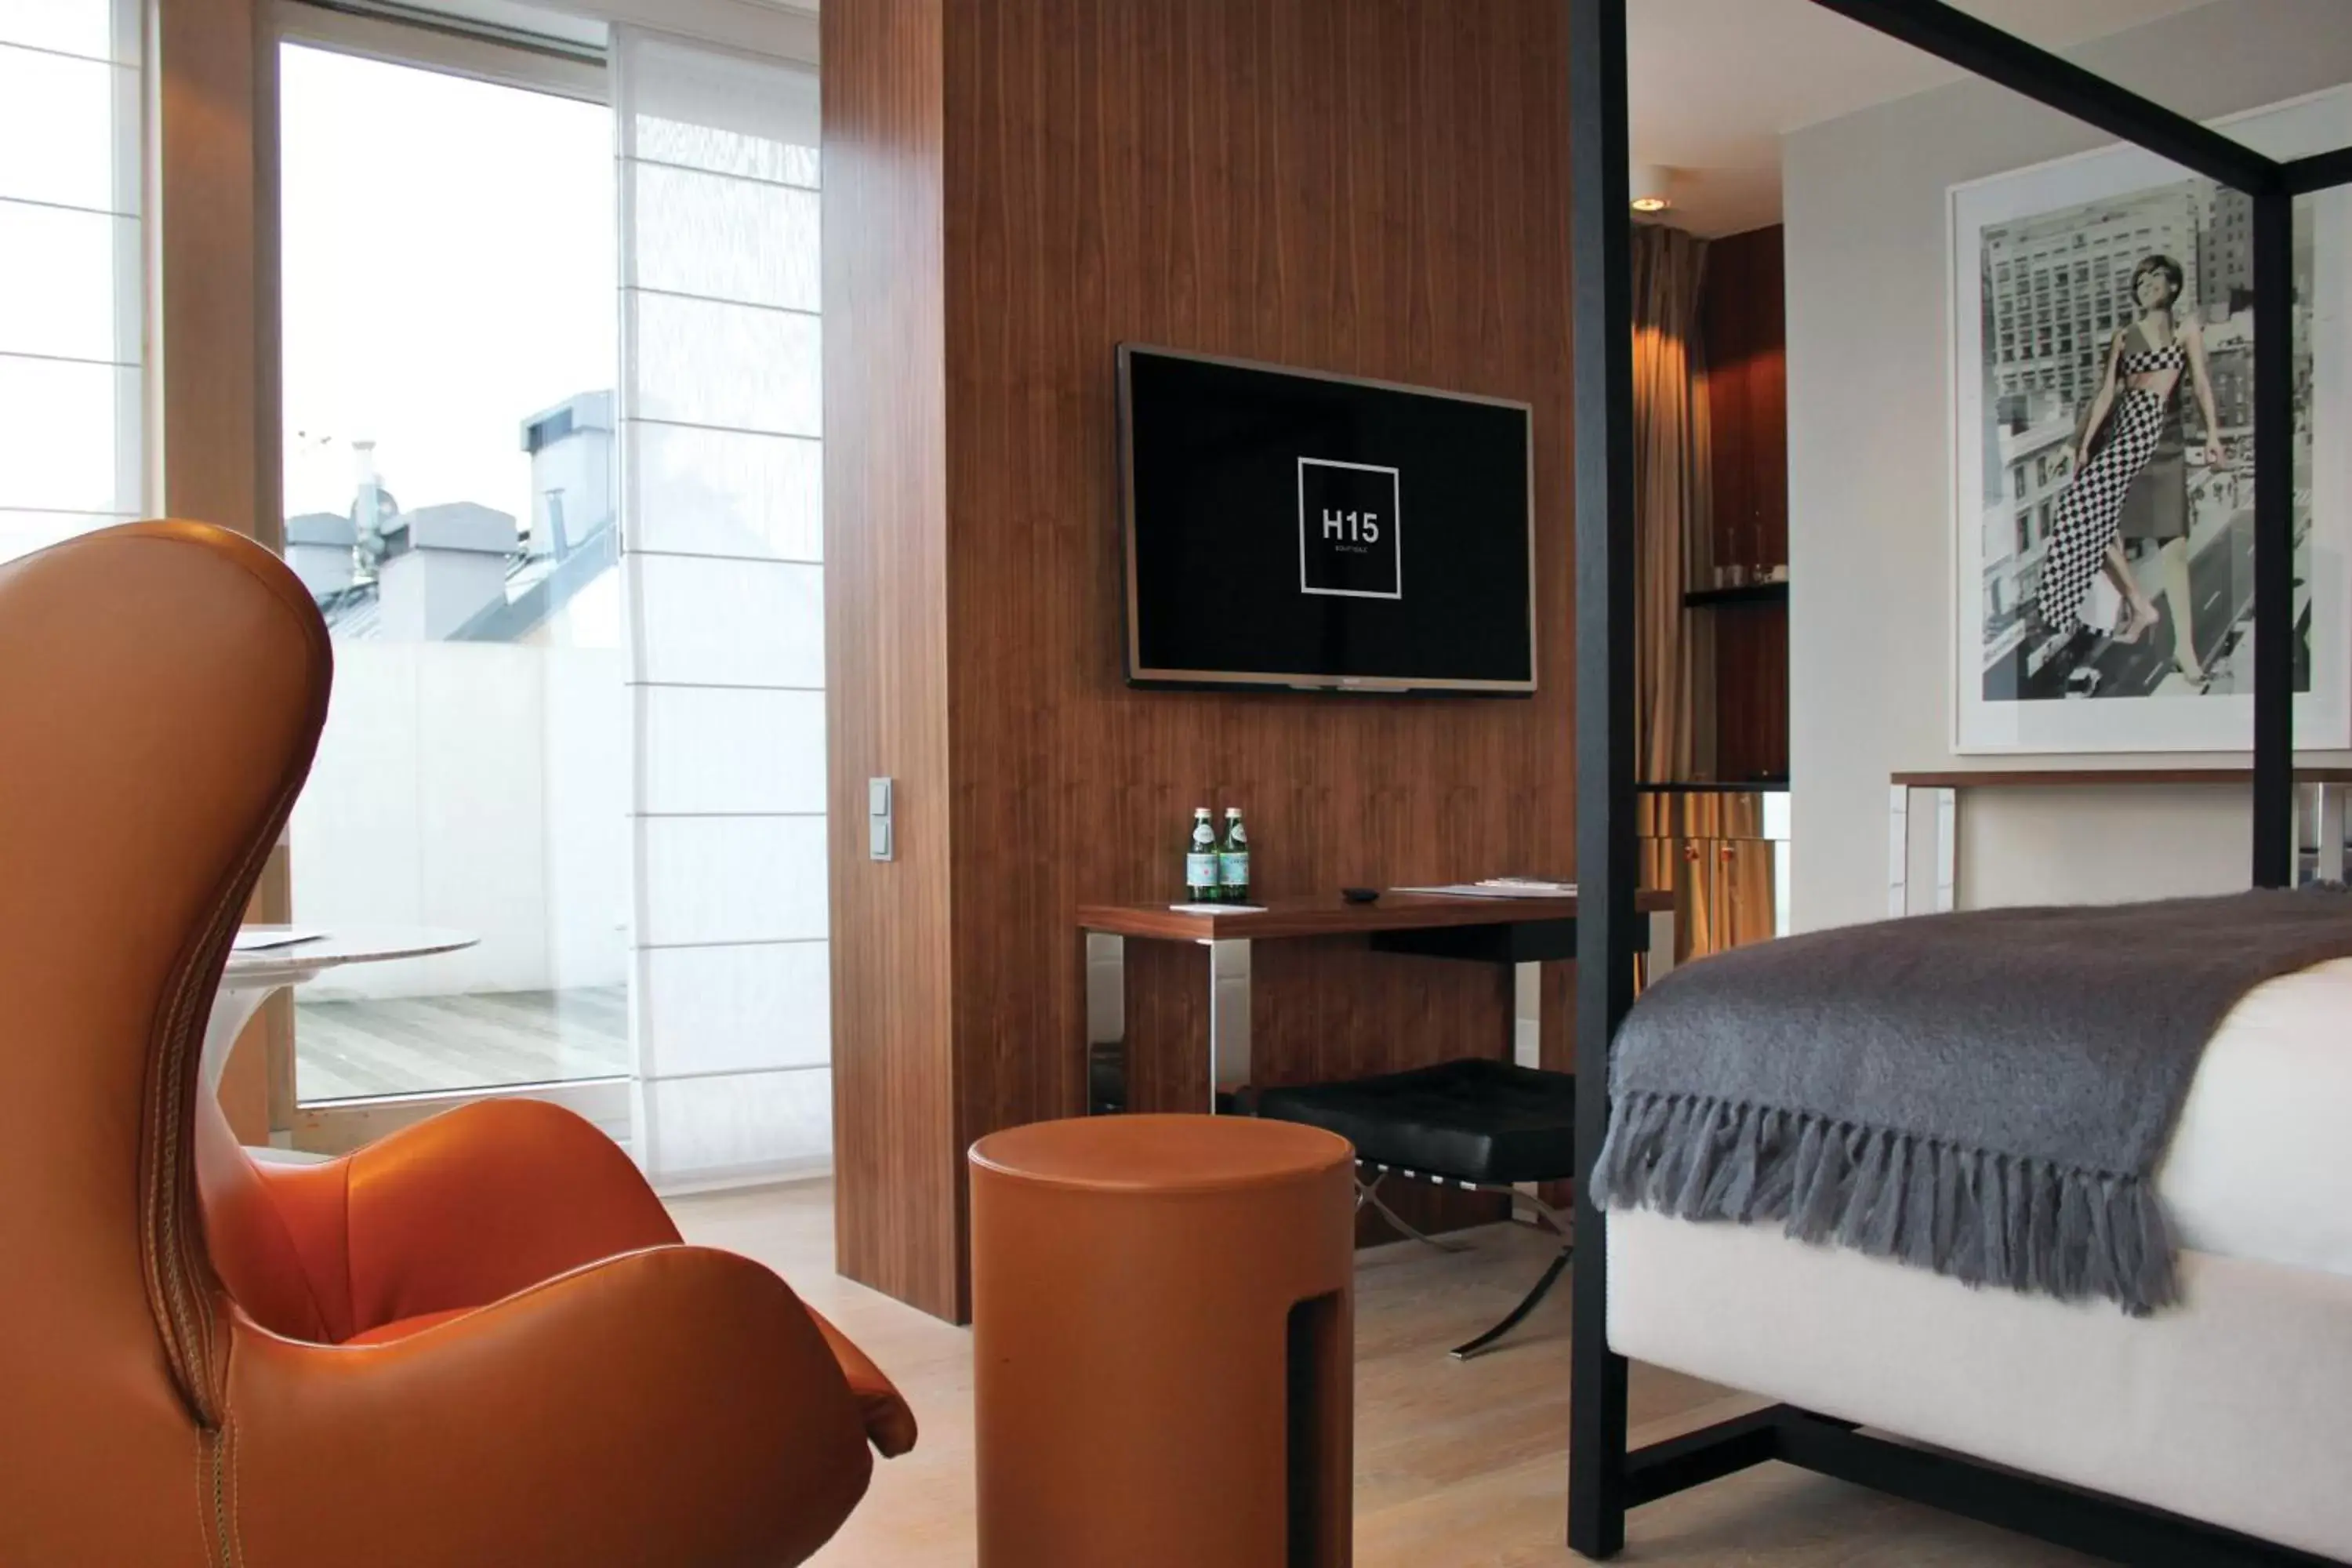 Apartment in H15 Boutique Hotel